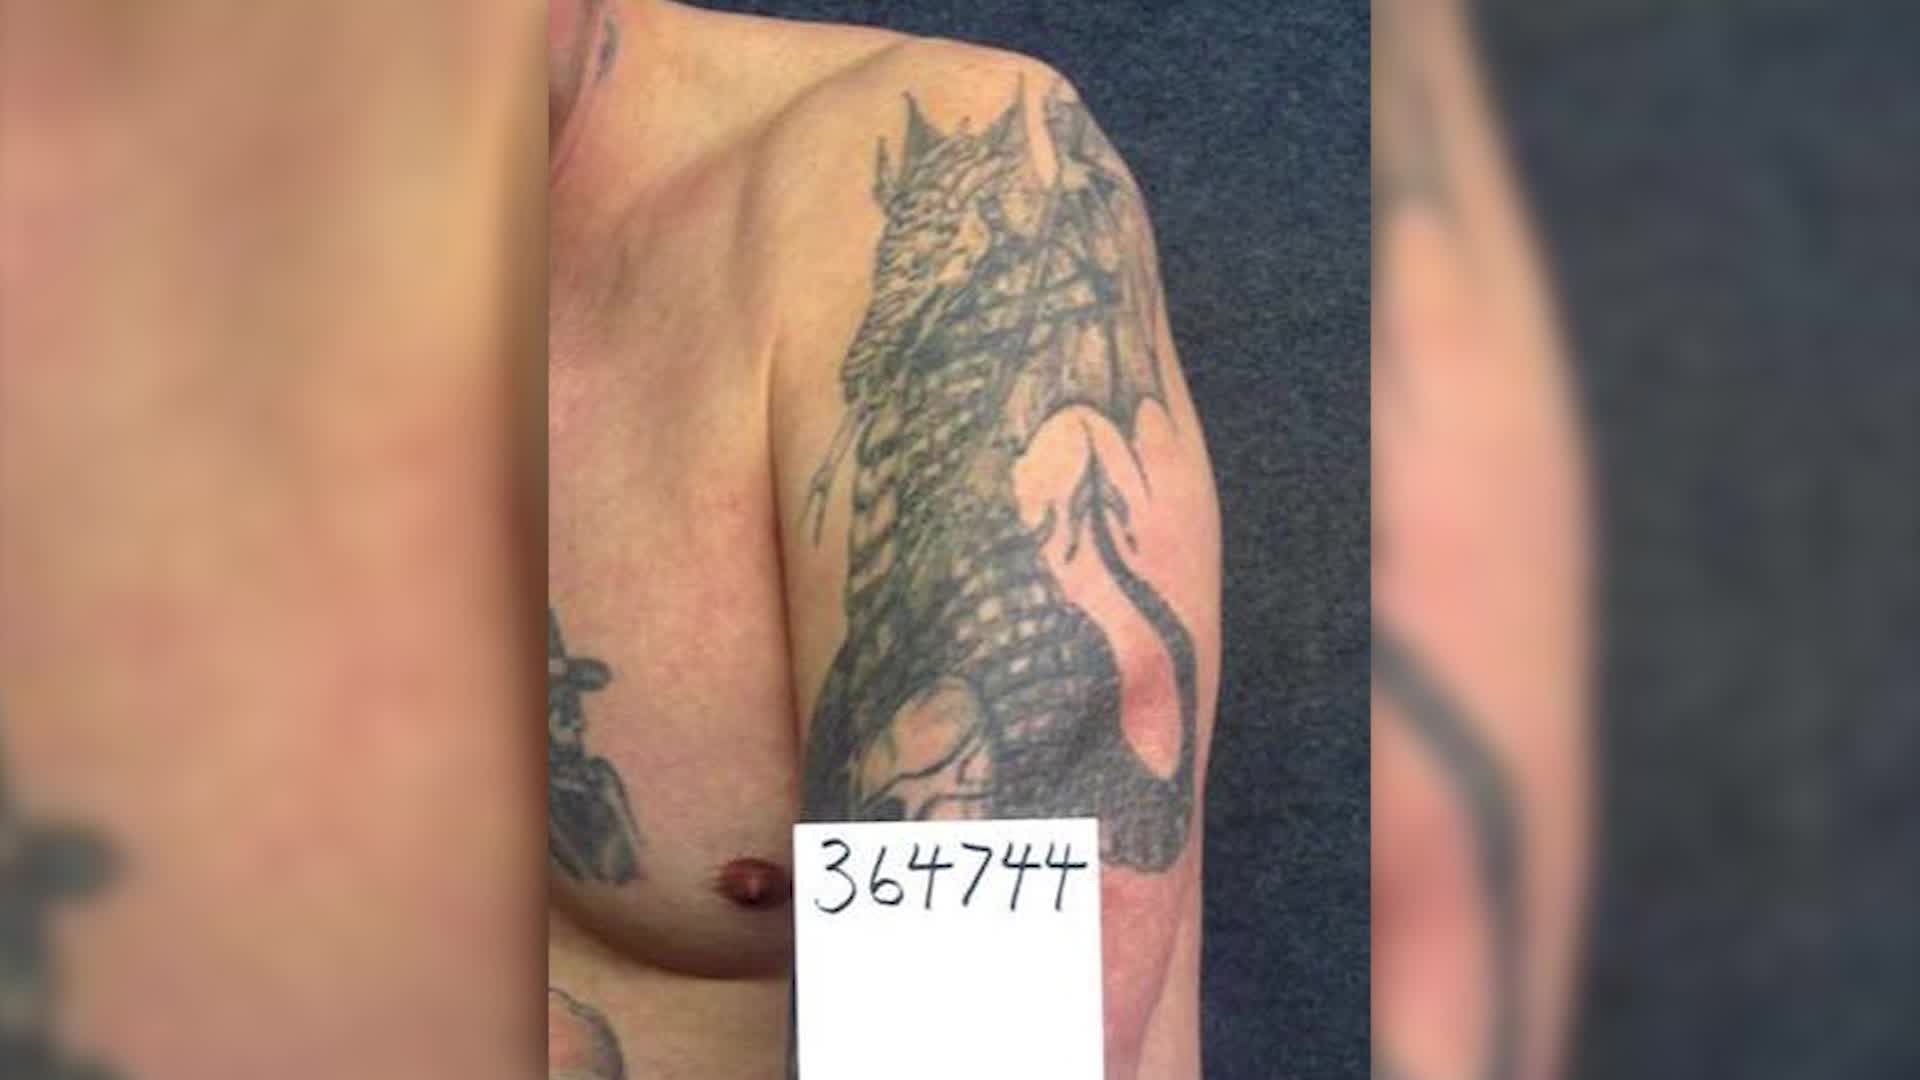 Distinctive tattoos of escaped inmate Curtis Ray Watson, a person of interest in death of prison employee